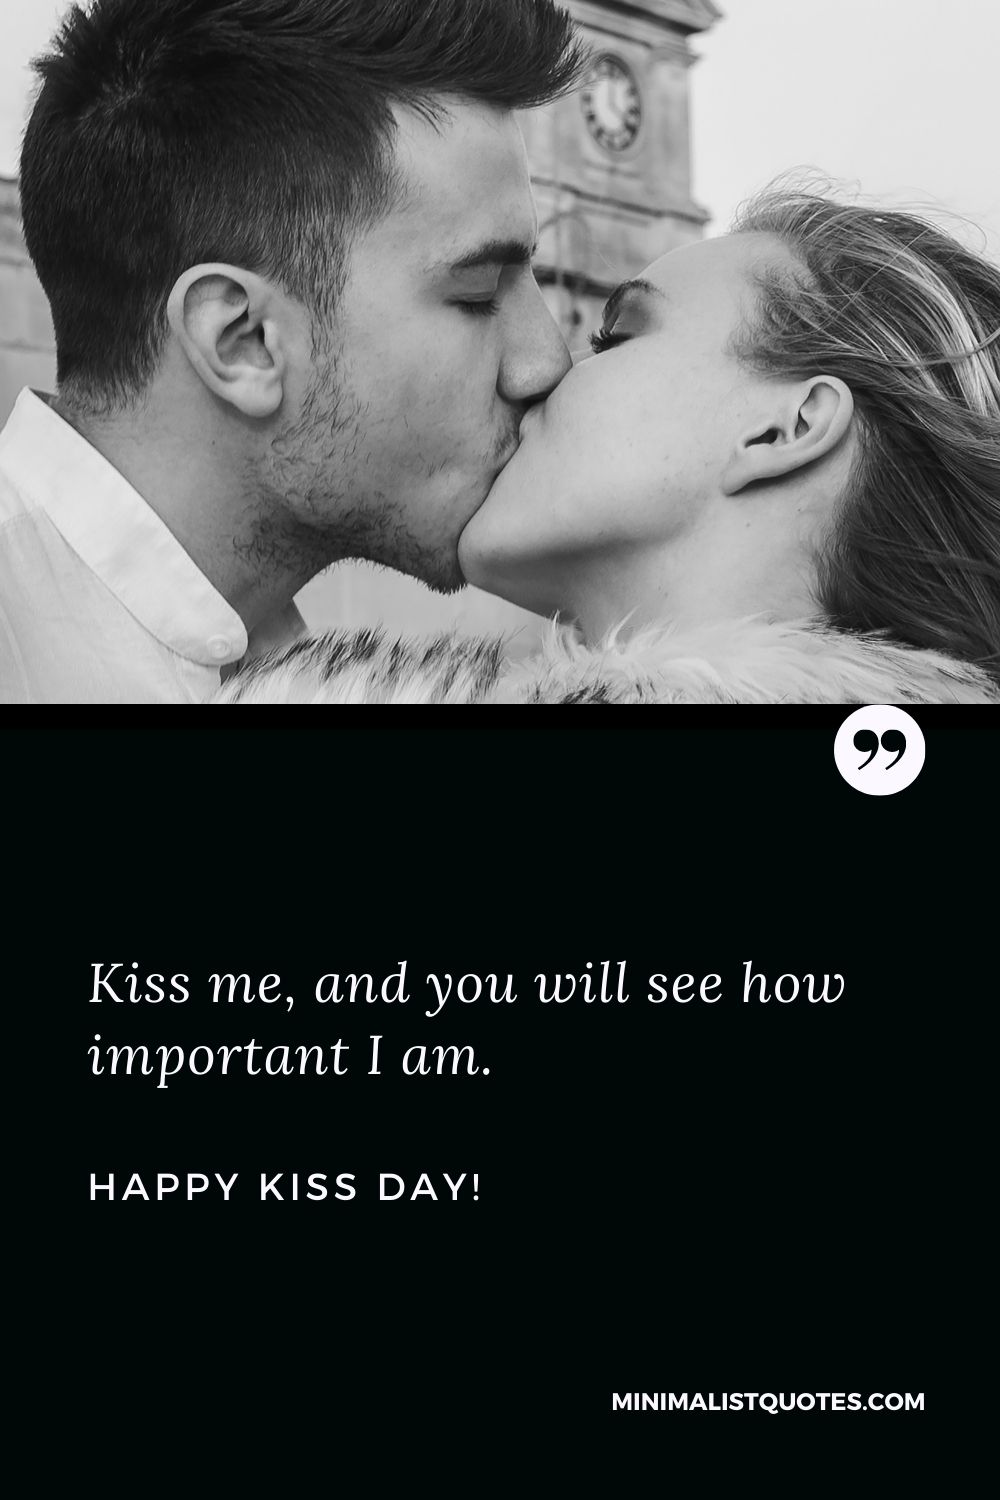 Kiss me, and you will see how important I am. Happy Kiss Day!